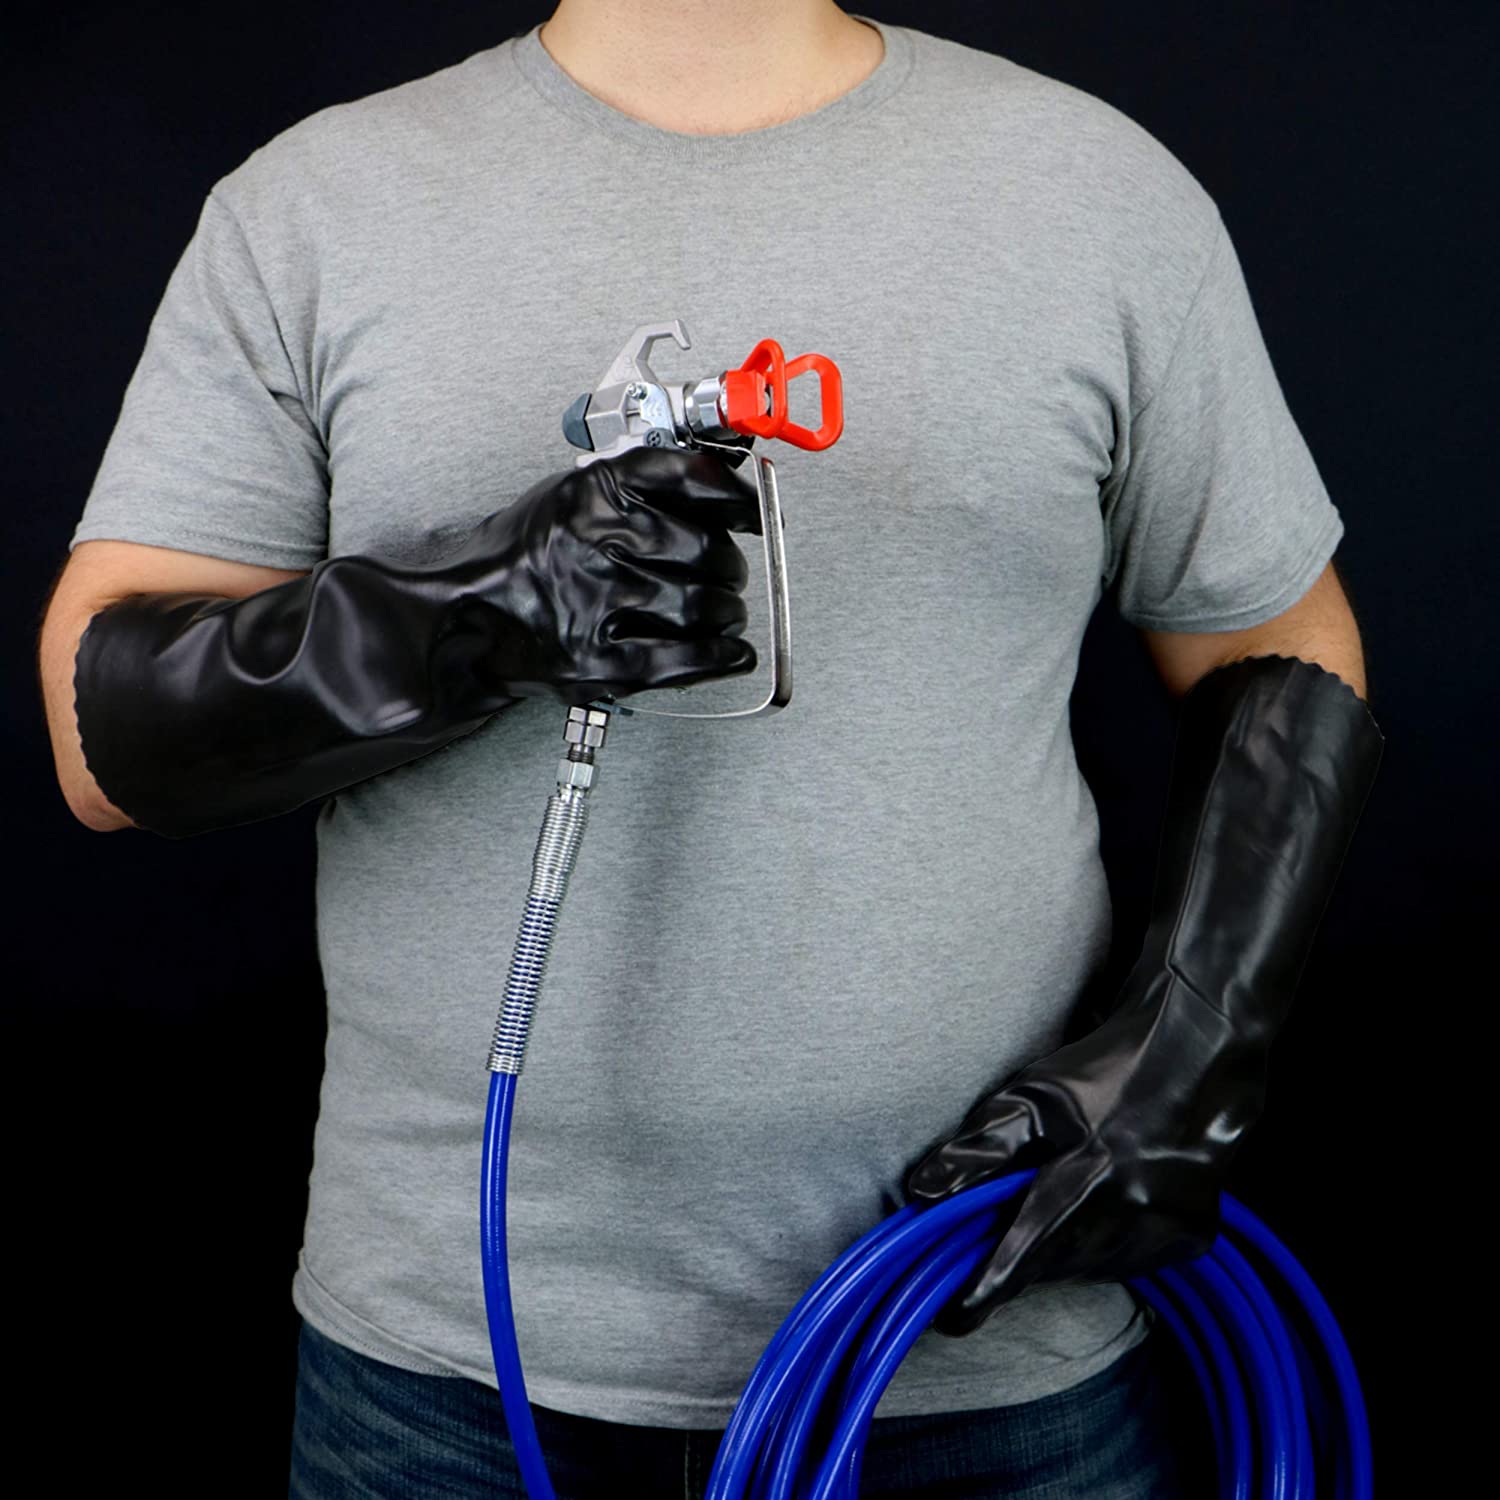 Chemical Resistant PVC Coated Work Gloves: 18" Length, One Size Fits Most, 1 Pair, Black - e4cents